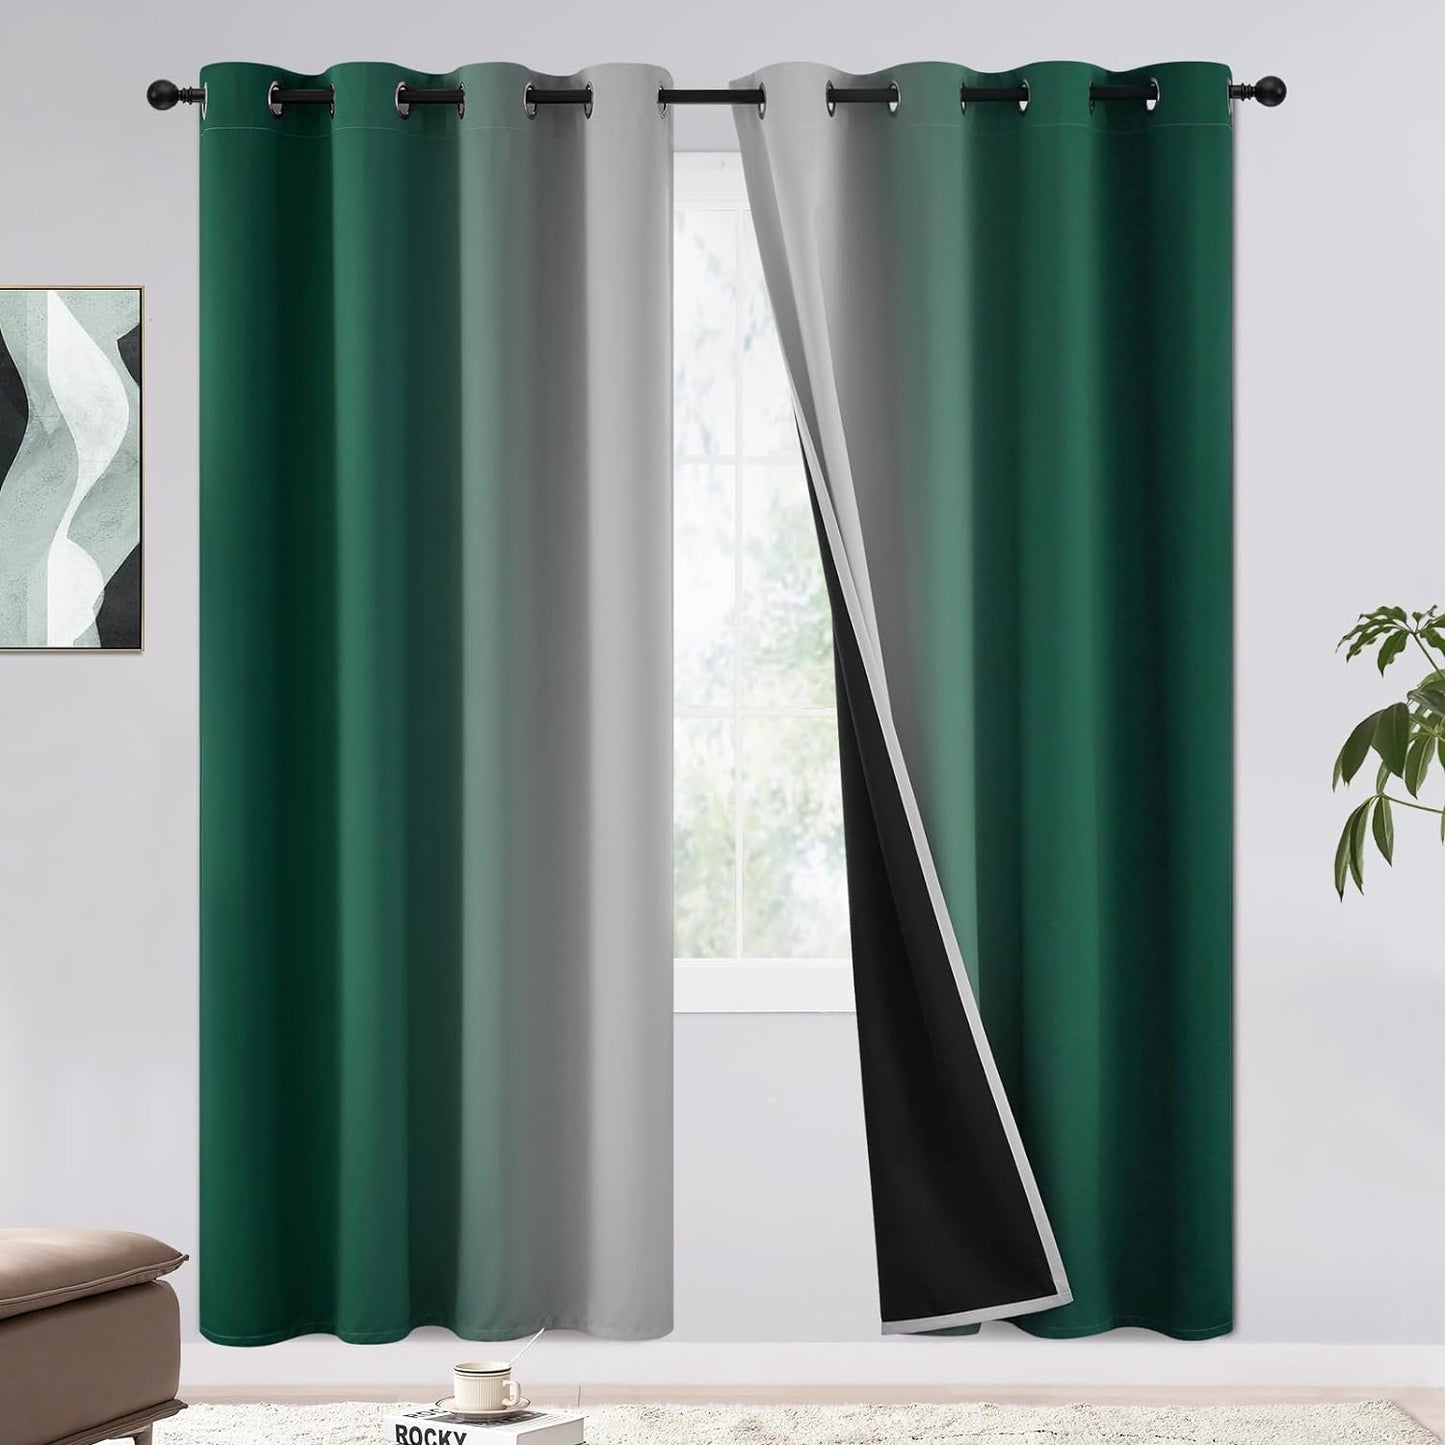 COSVIYA 100% Blackout Curtains & Drapes Ombre Purple Curtains 63 Inch Length 2 Panels,Full Room Darkening Grommet Gradient Insulated Thermal Window Curtains for Bedroom/Living Room,52X63 Inches  COSVIYA Green To Greyish White 52W X 72L 